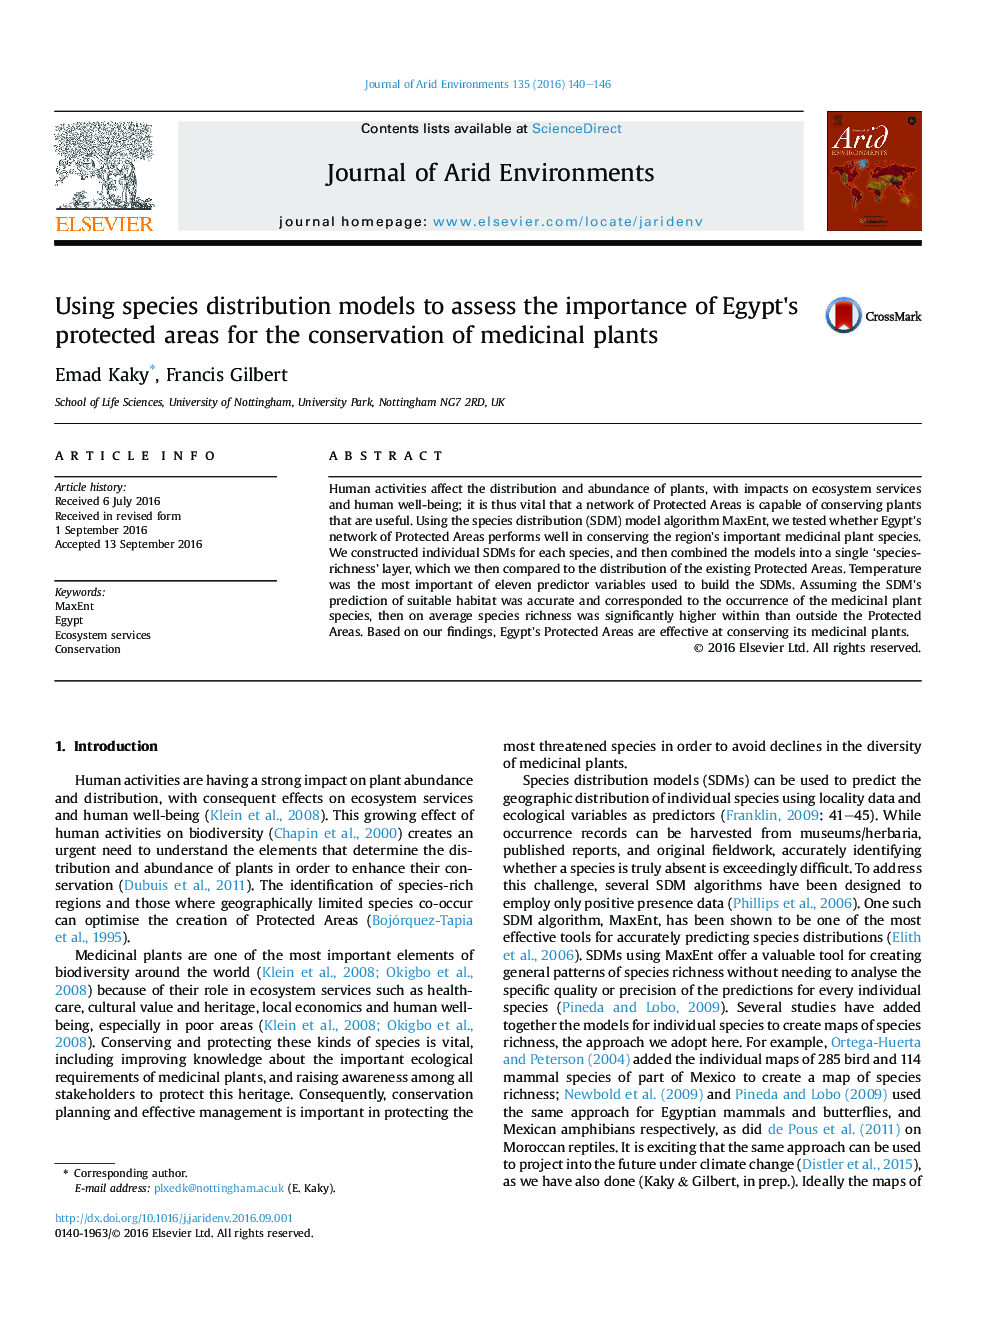 Using species distribution models to assess the importance of Egypt's protected areas for the conservation of medicinal plants